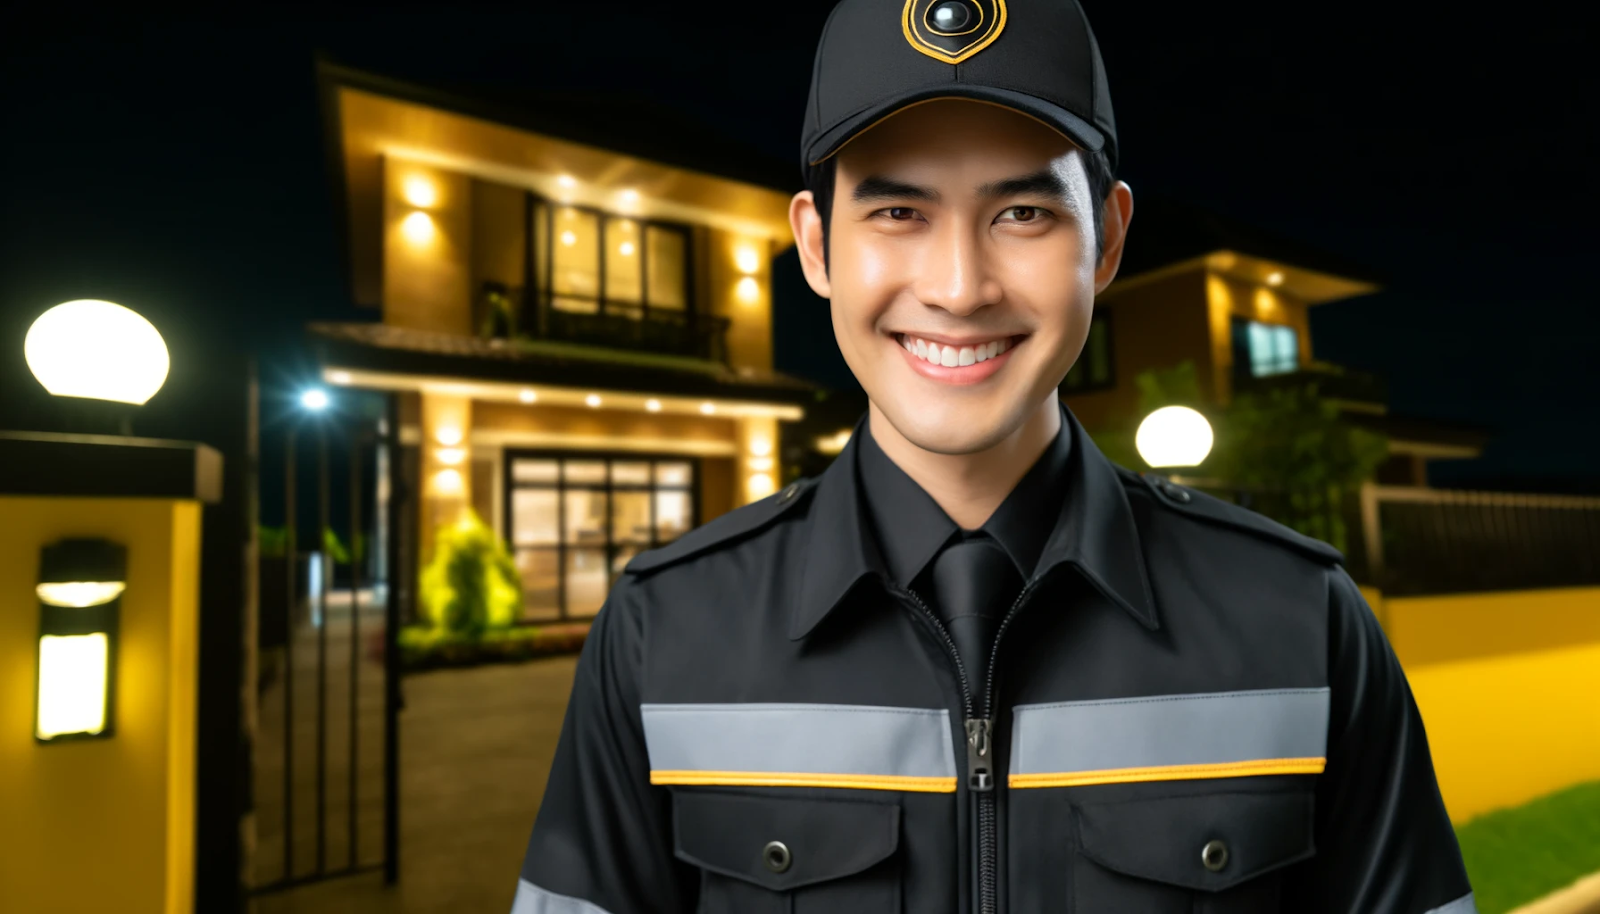 Cheerful security guard on night shift patrol, promoting health and safety practices for night shift workers.